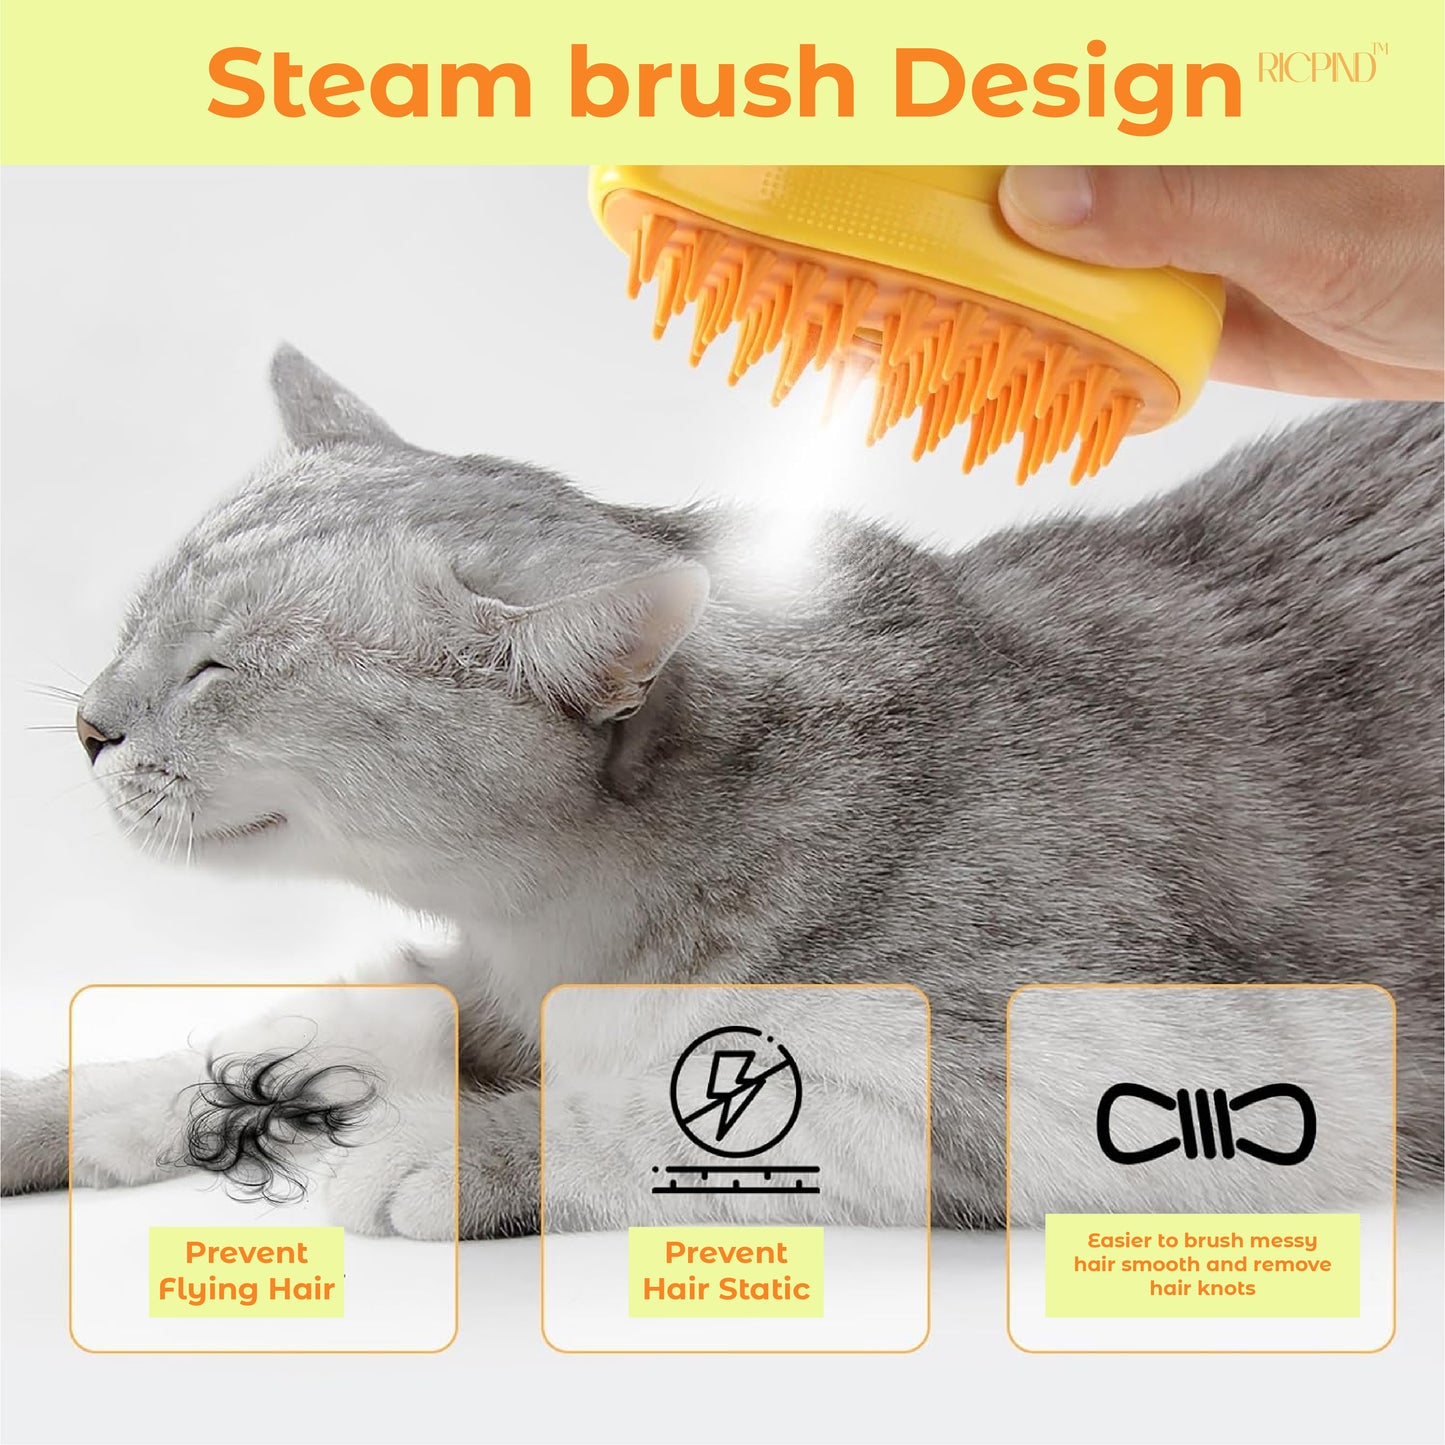 RICPIND Steamy Fur Away Cleaning Pet Brush